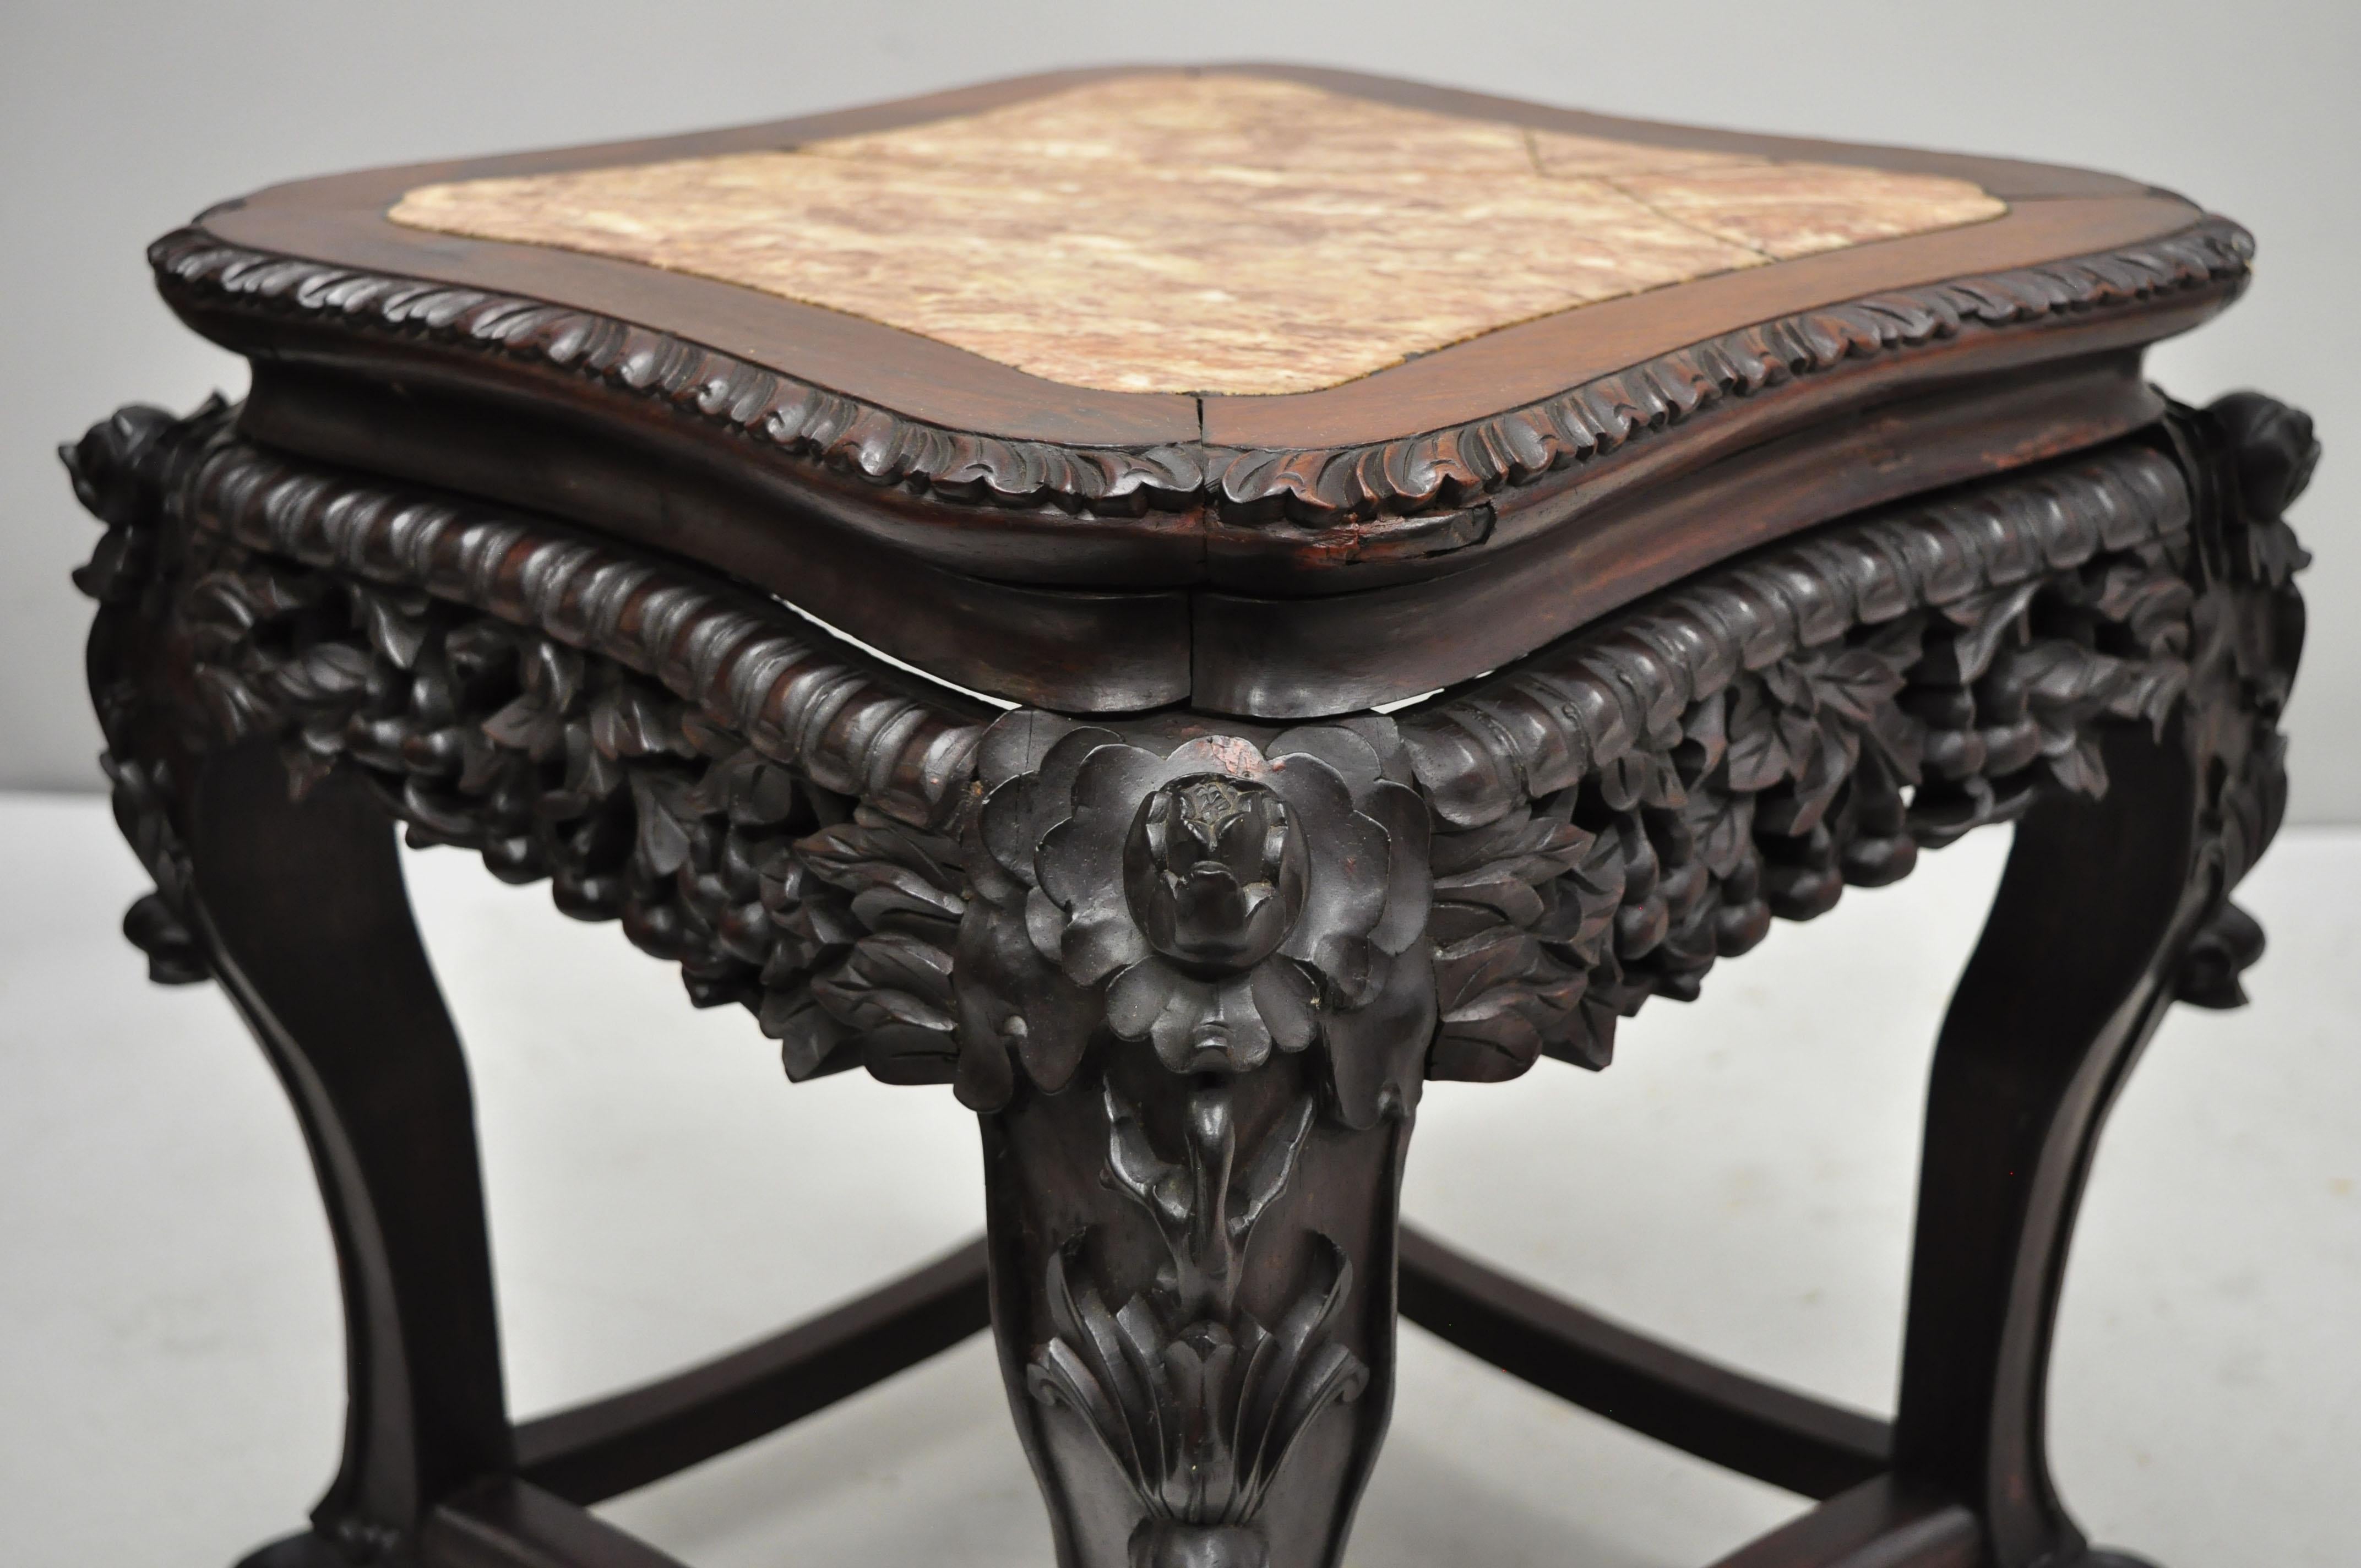 Chinoiserie Antique Carved Hardwood Rosewood Marble-Top Chinese Pedestal Table Plant Stand H